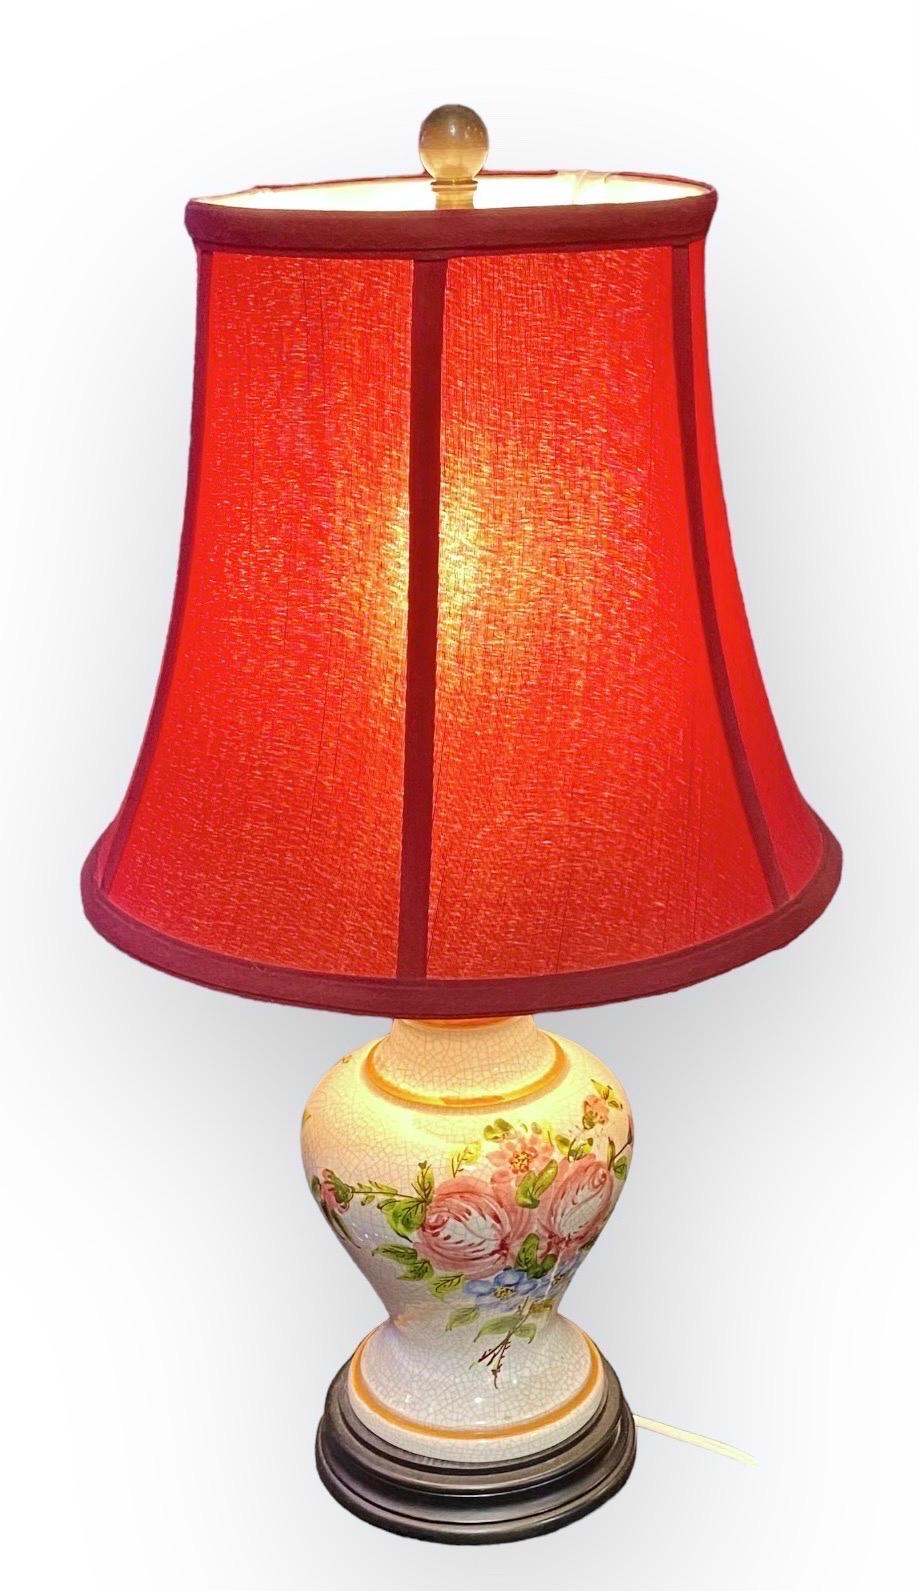 Vintage French Faience Table Lamp In Good Condition For Sale In New Orleans, LA